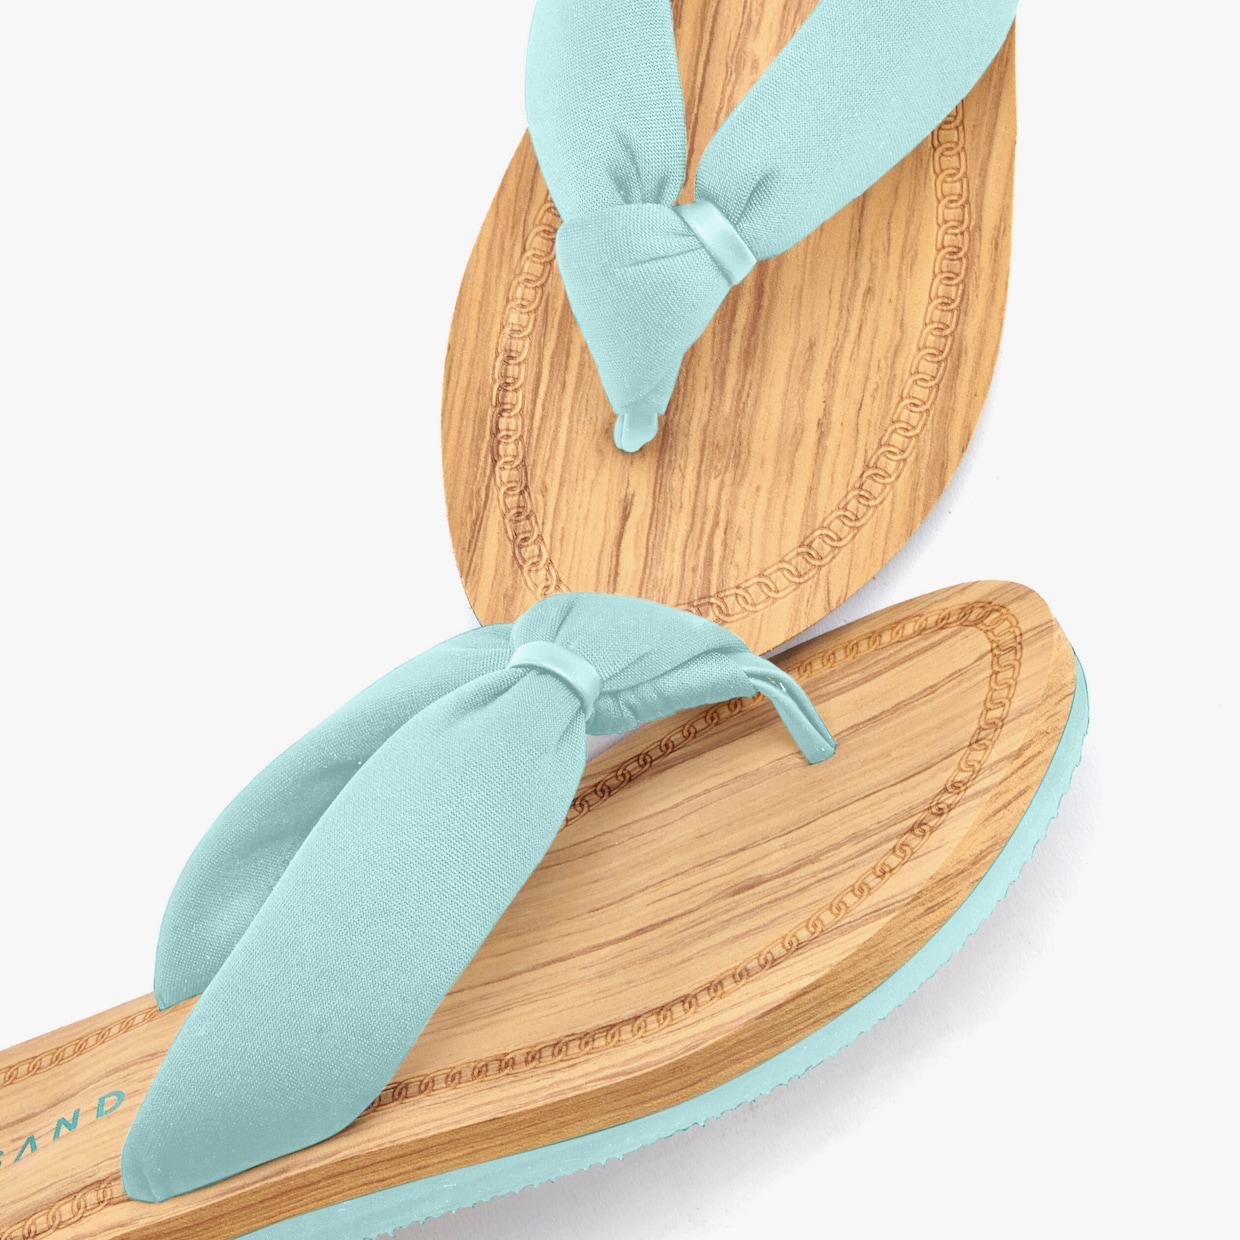 Elbsand Badslippers - turquoise